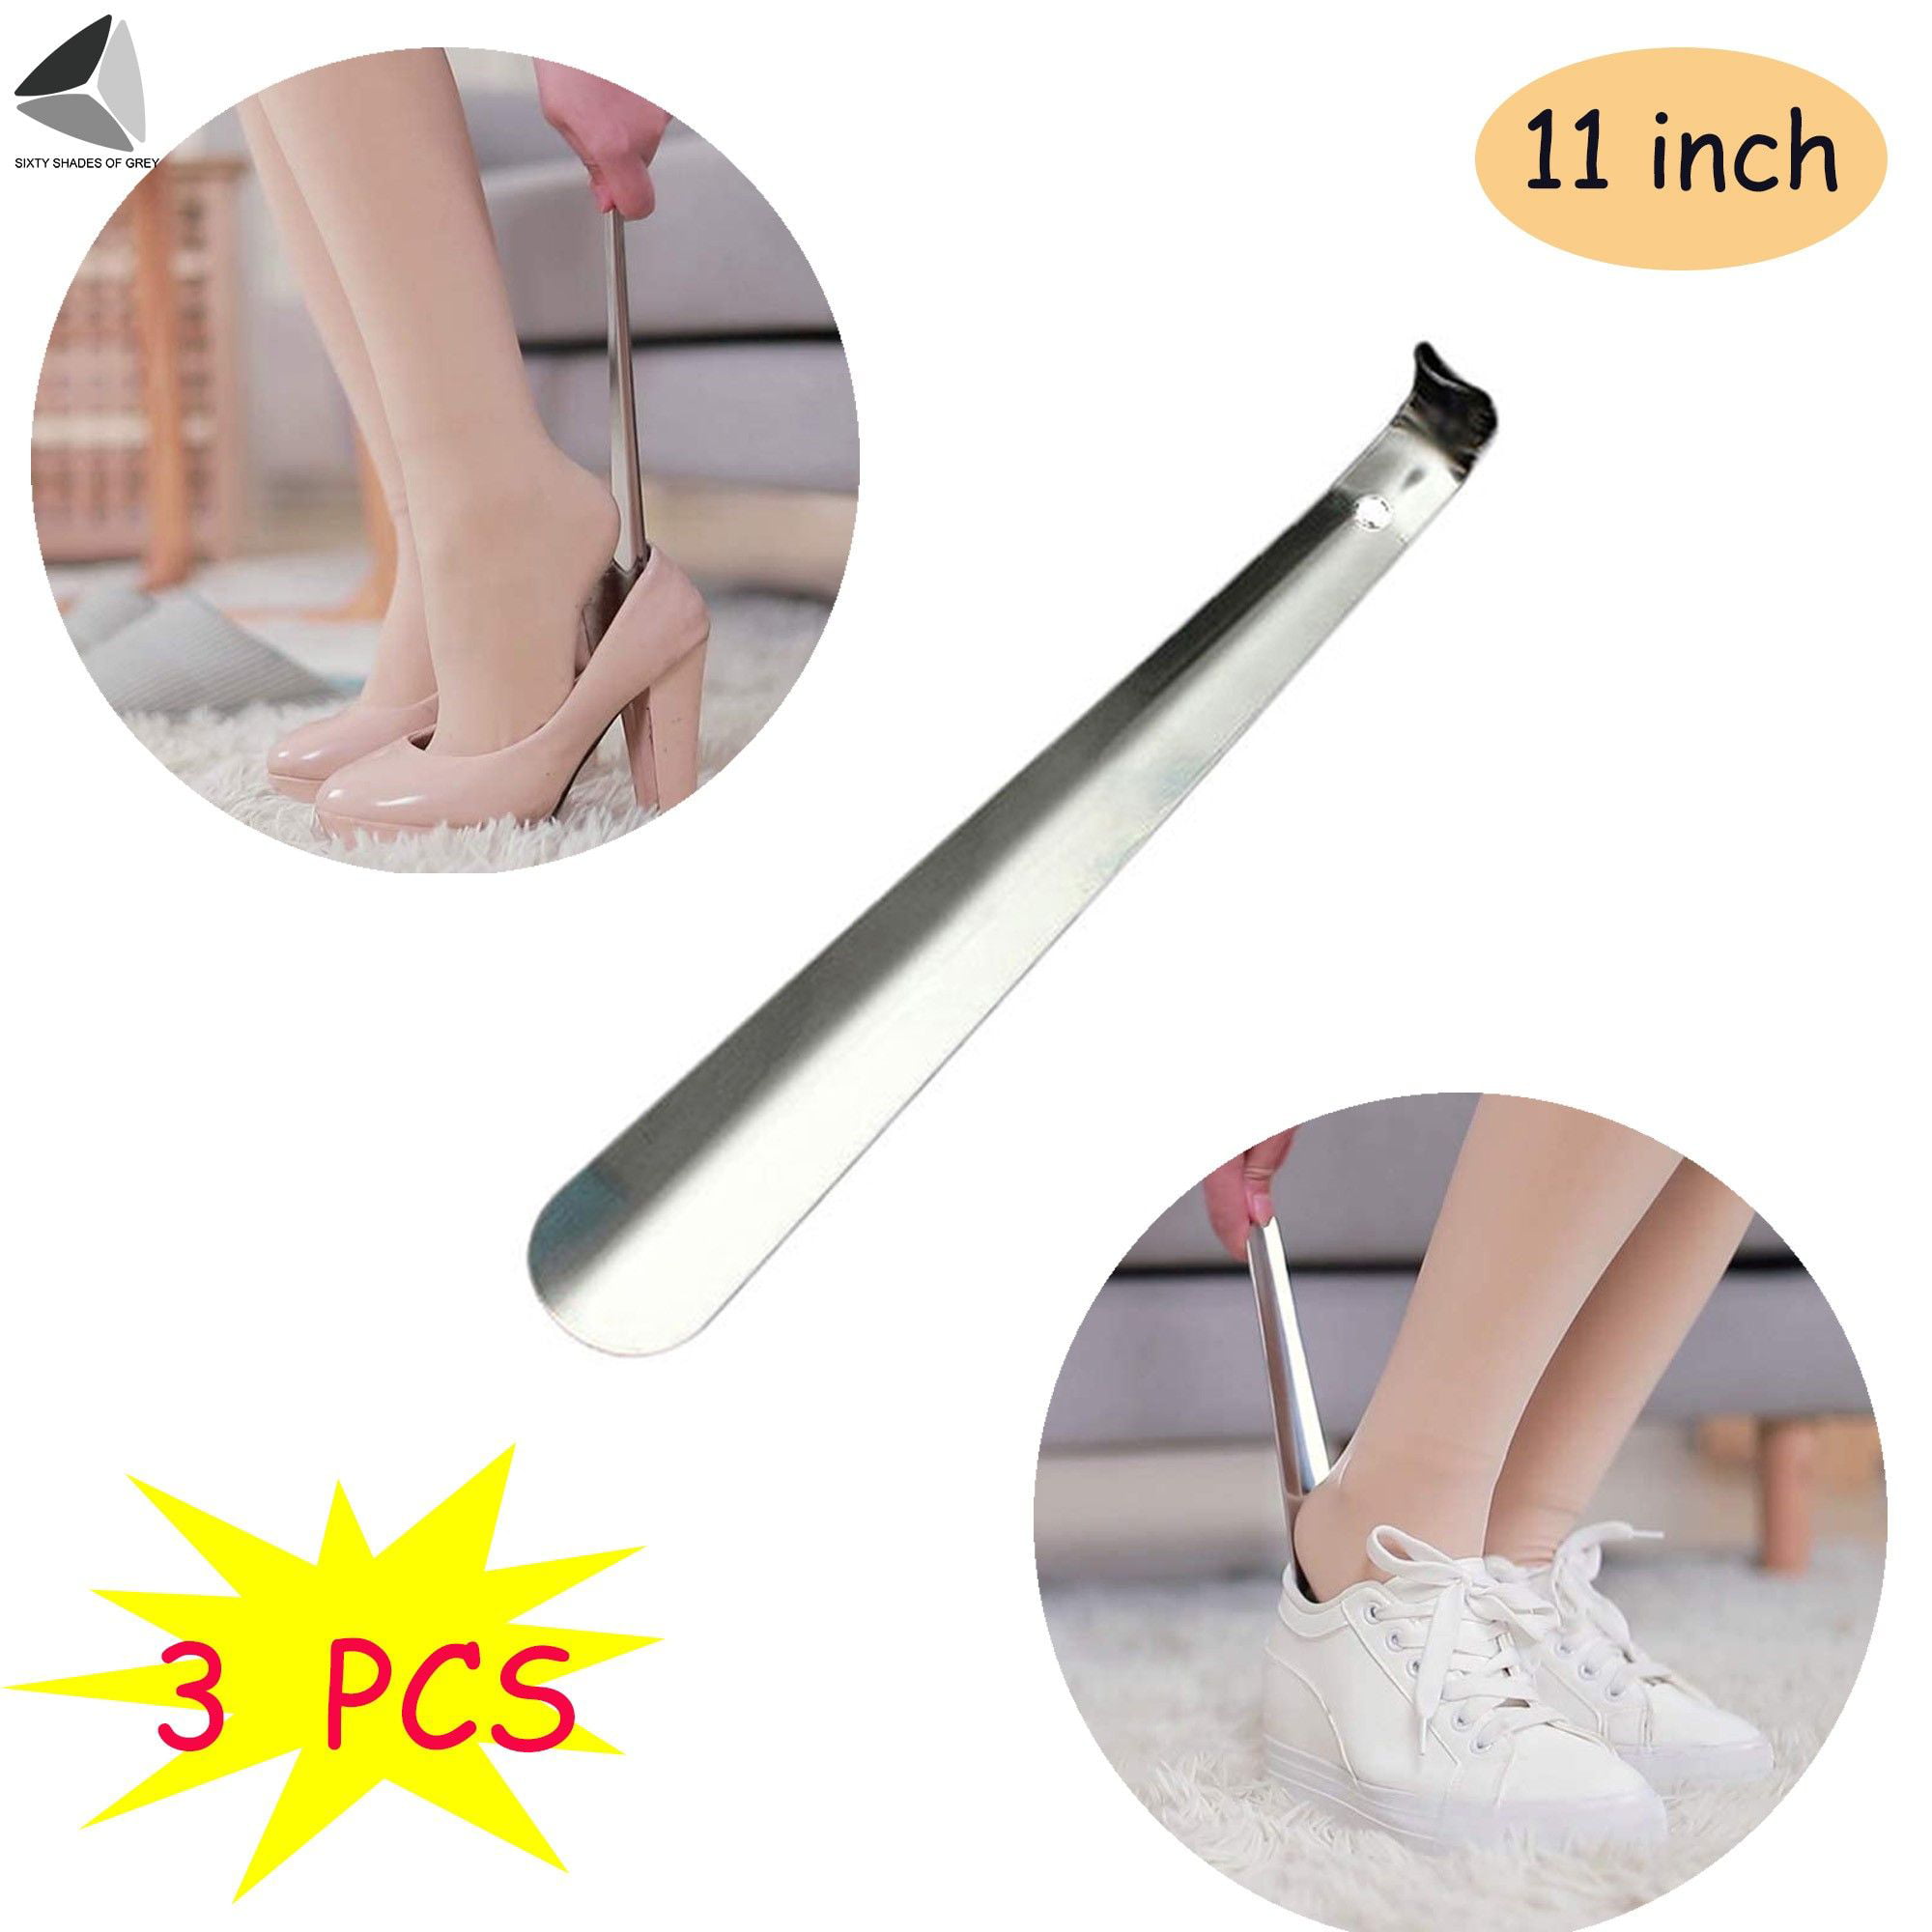 11.8" Stainless Steel Long Handle Spoon Shoehorn Shoe Horn Lifter Remover HOT 